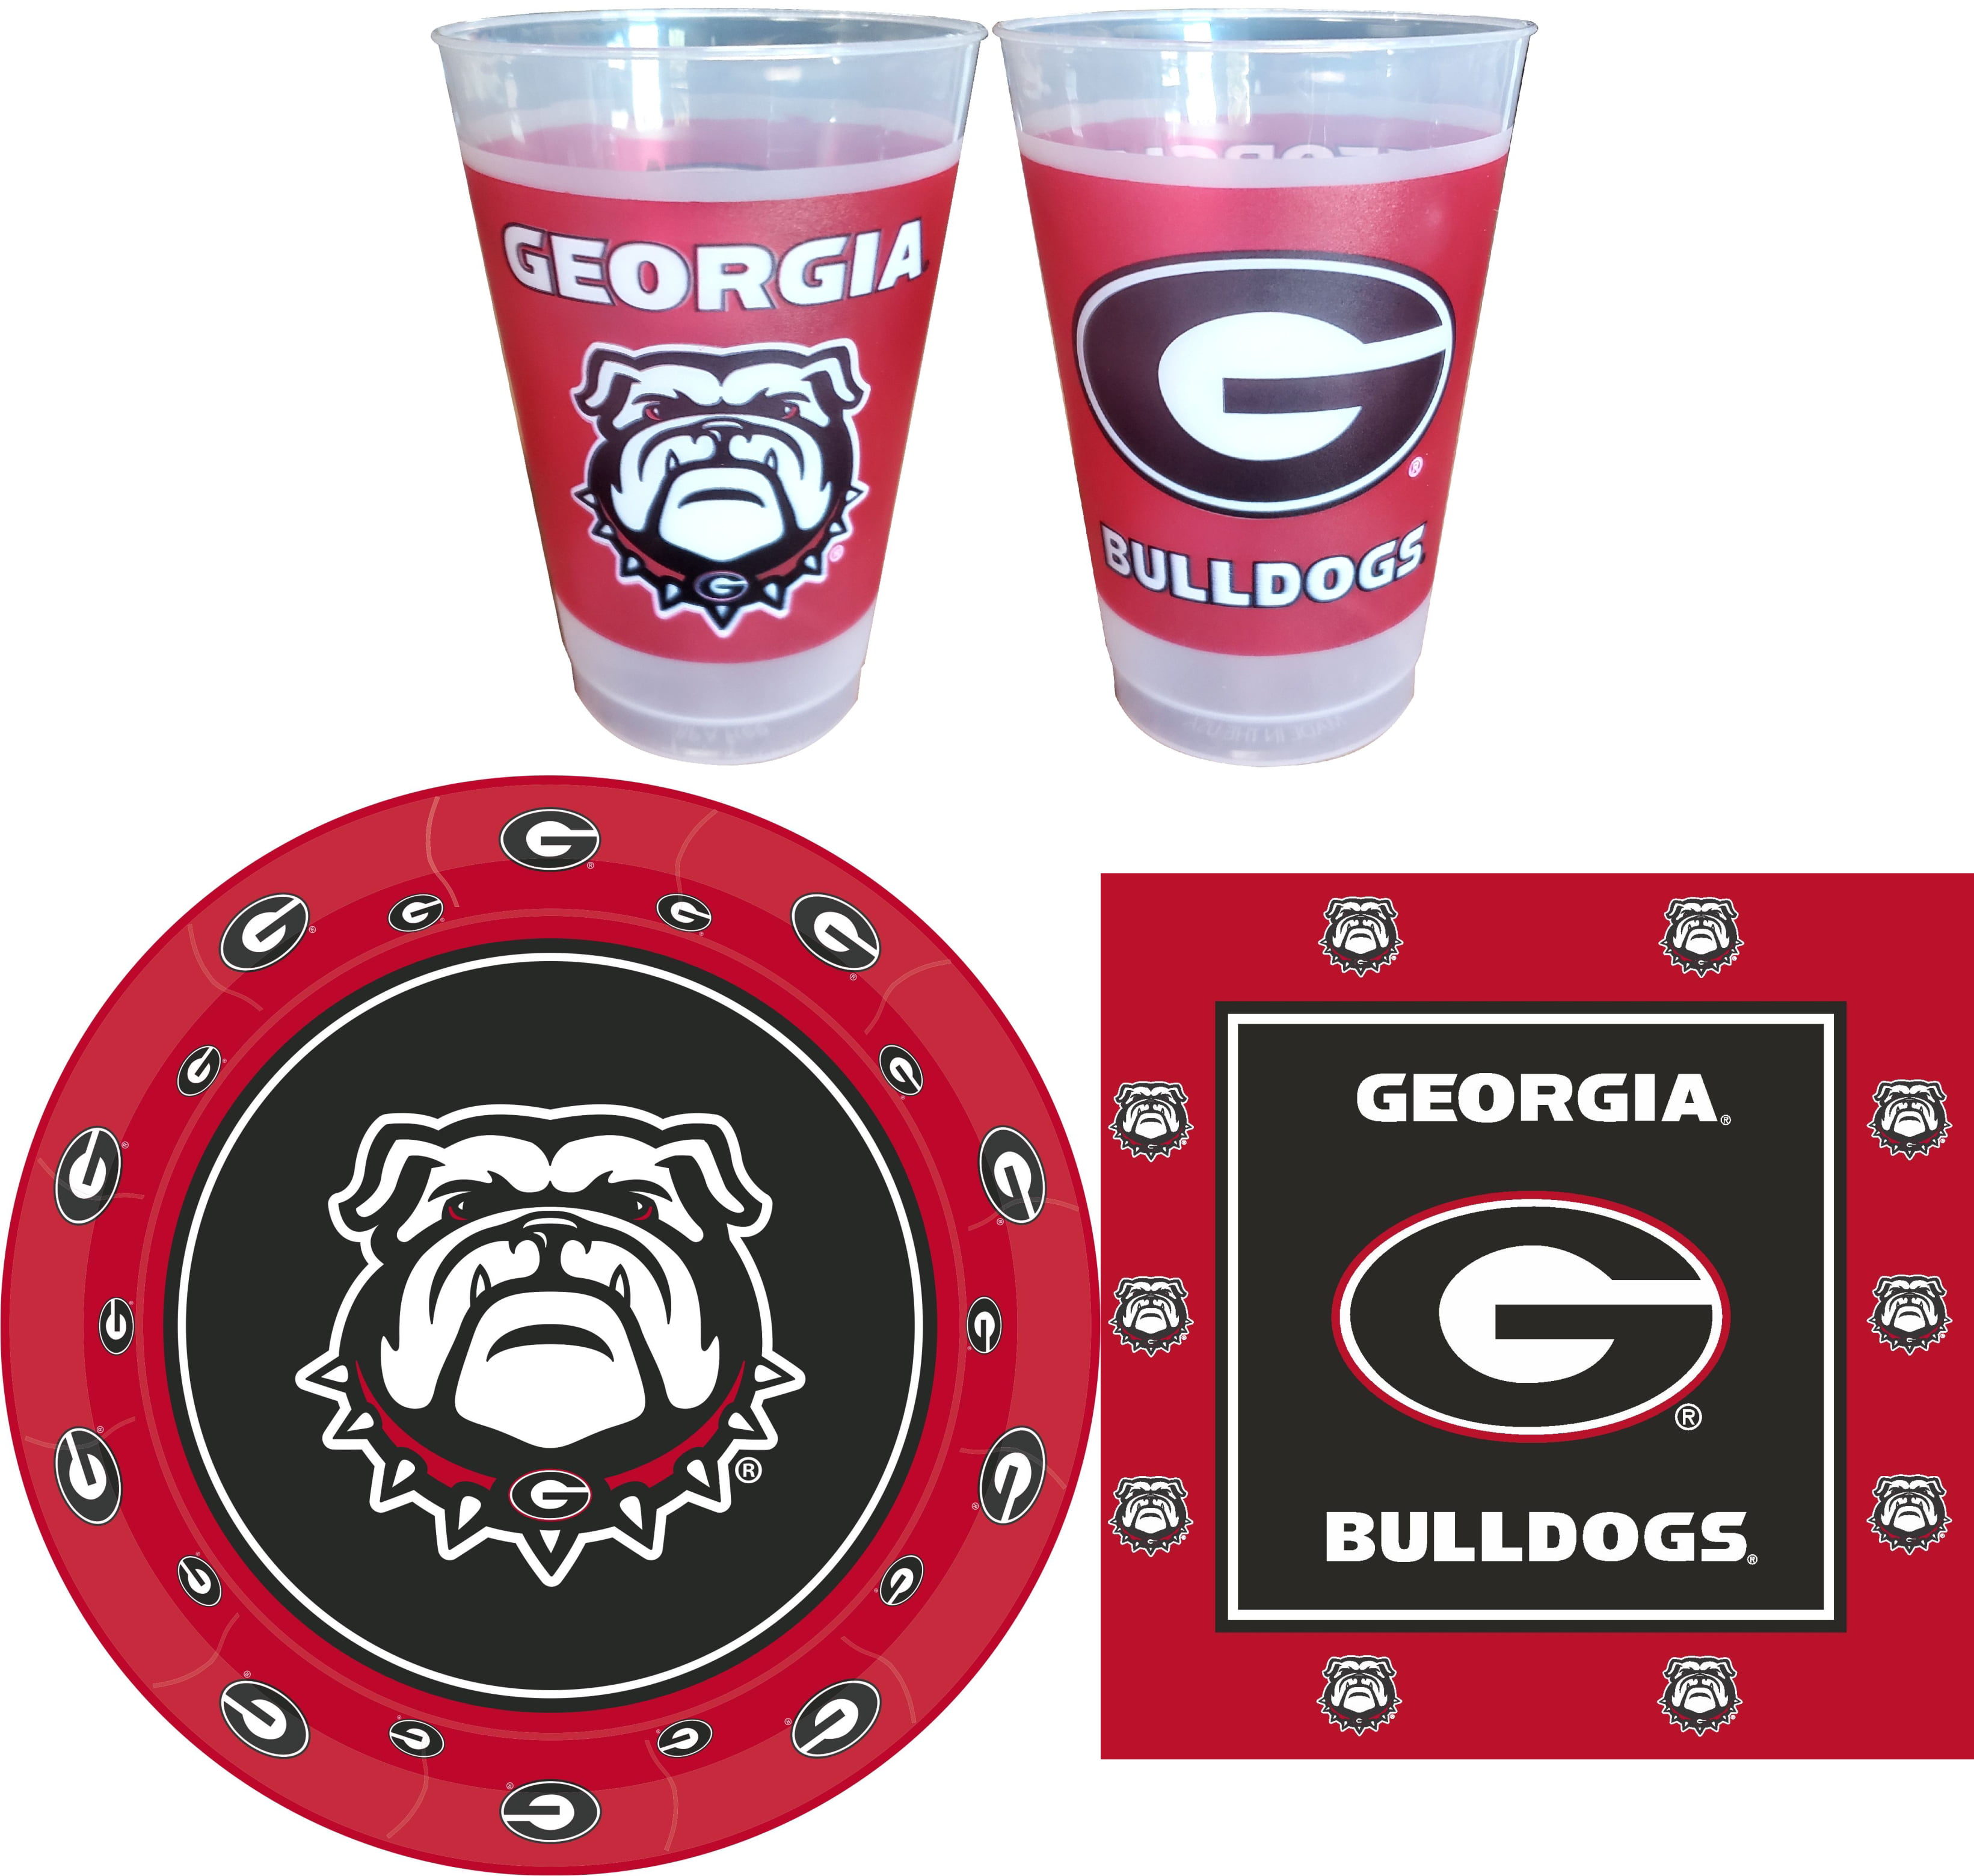 GEORGIA BULLDOGS Football Game Day Birthday Party Balloons Decorations Supplies 